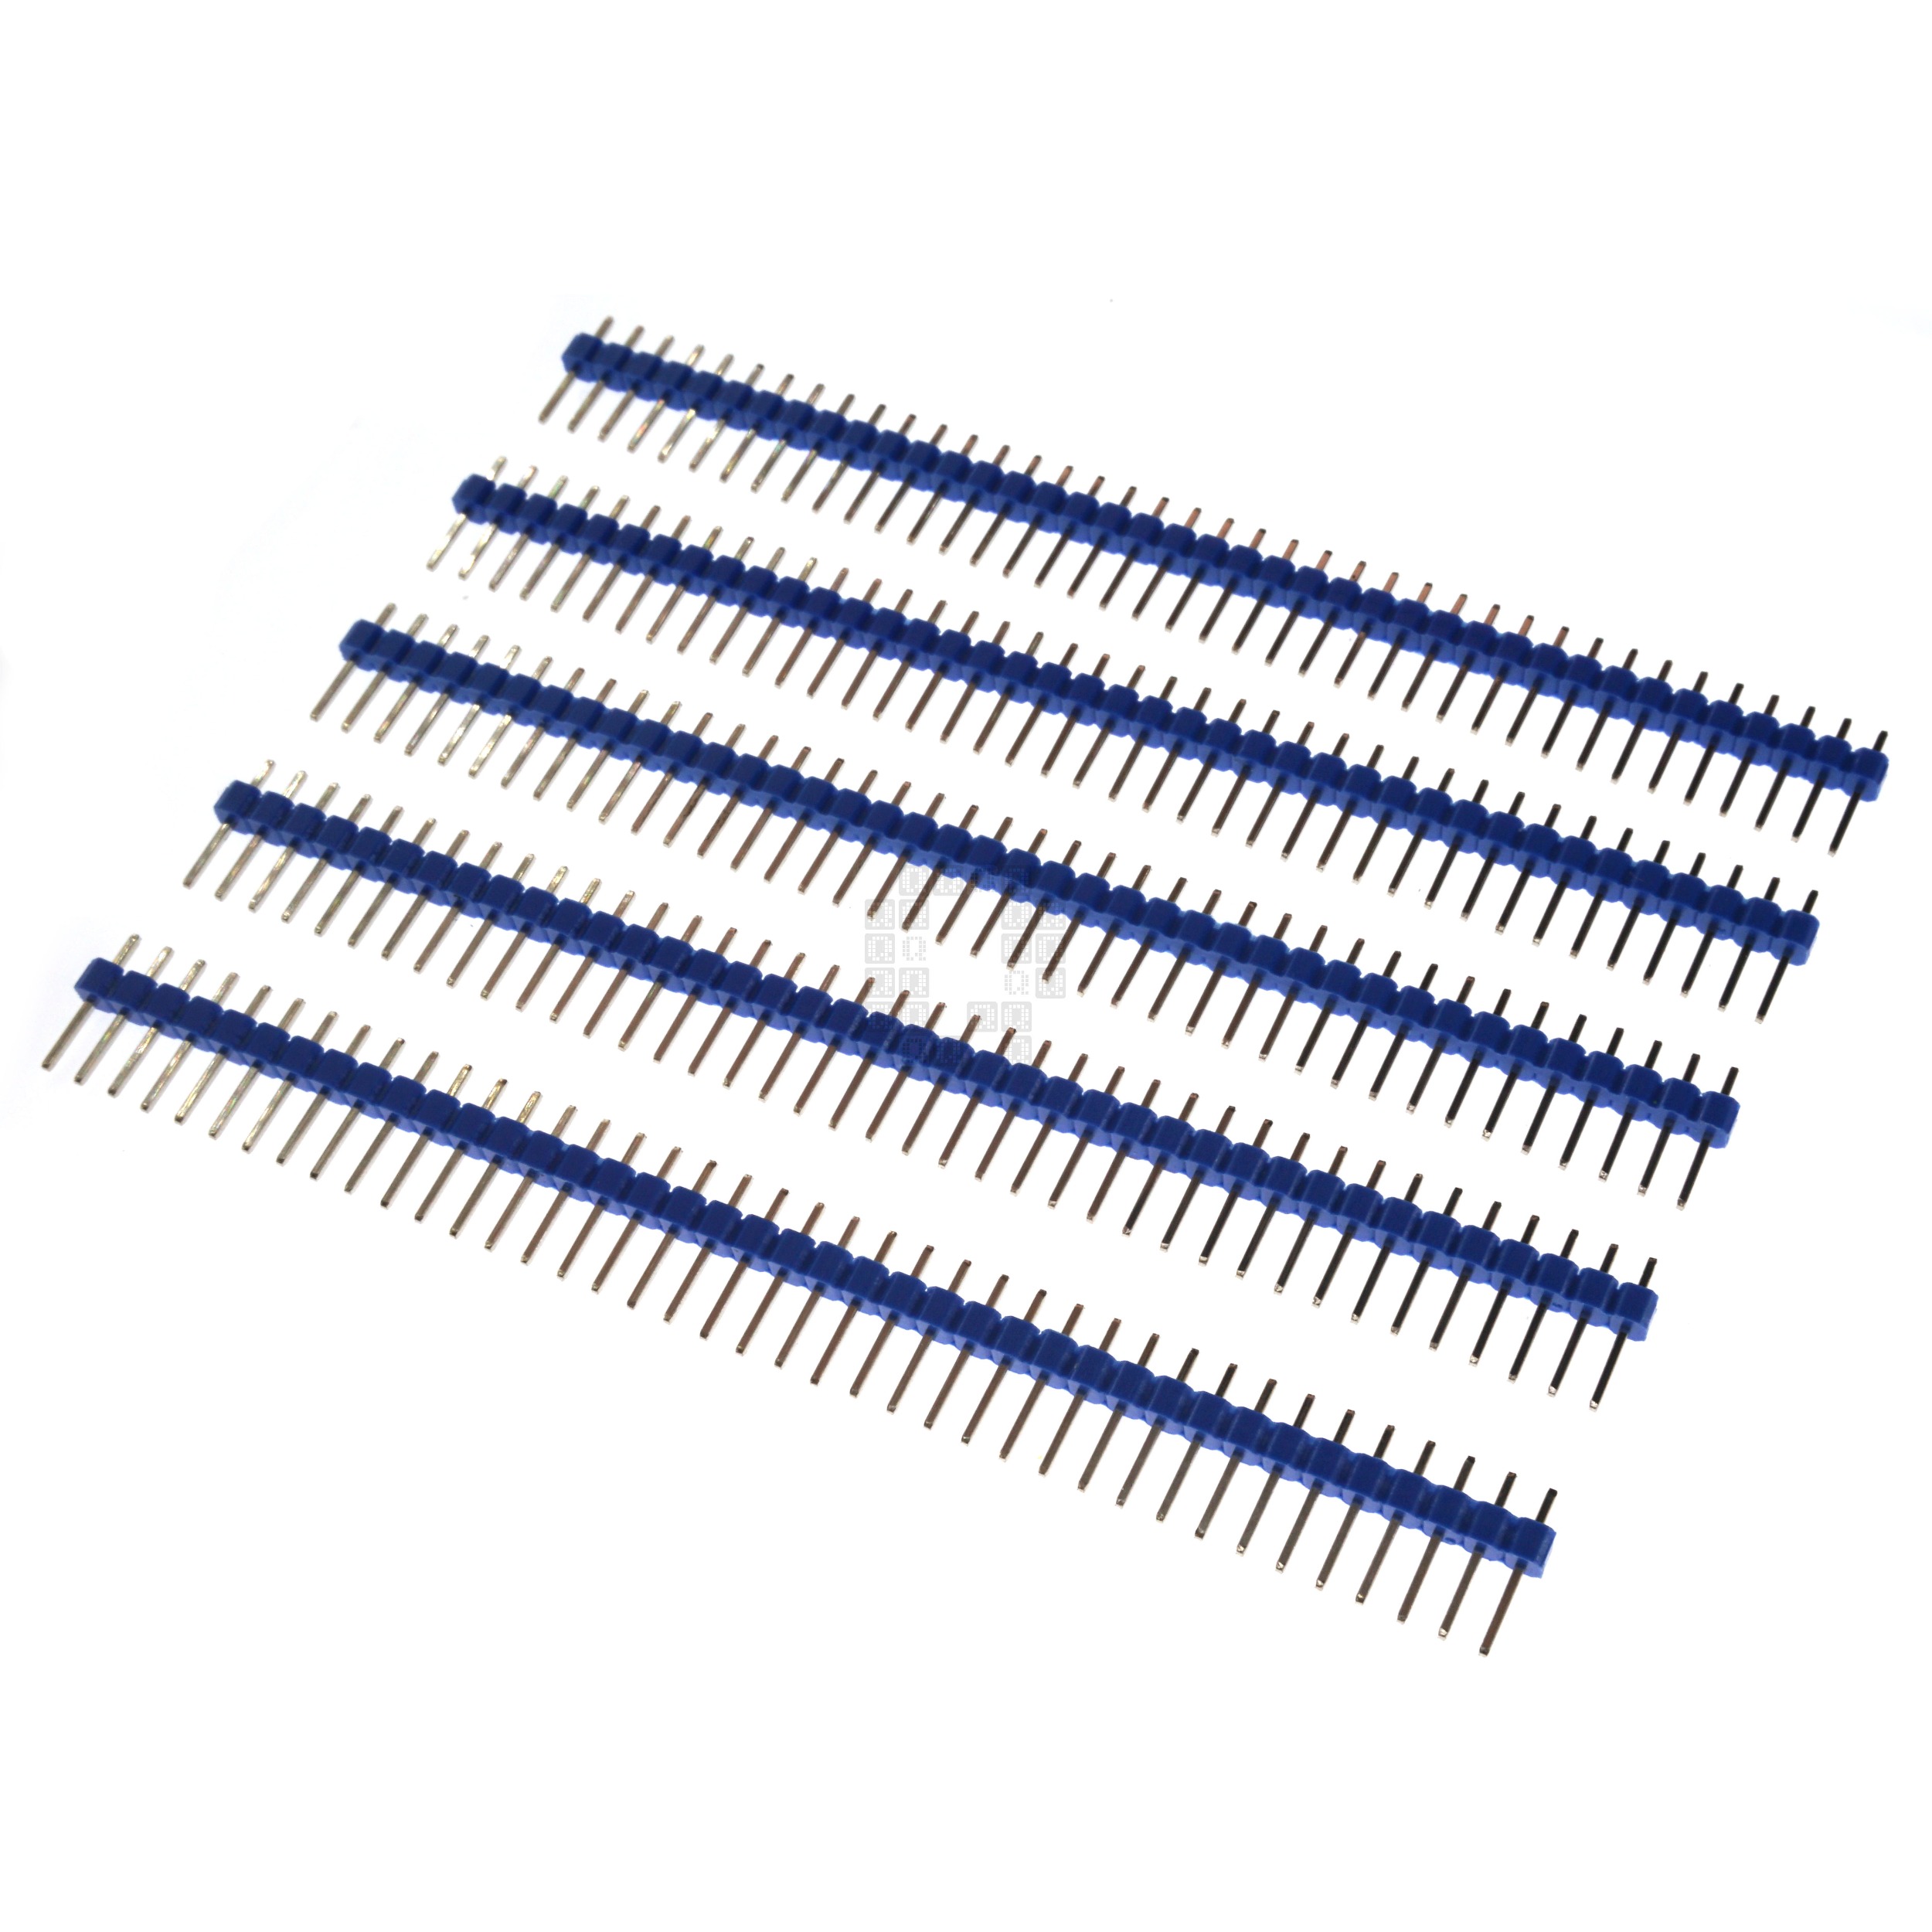 1x40 Pin Male Breakable Single Row Pin Header, 2.54mm Pitch, 11.2mm Height, 5-Pack, Blue